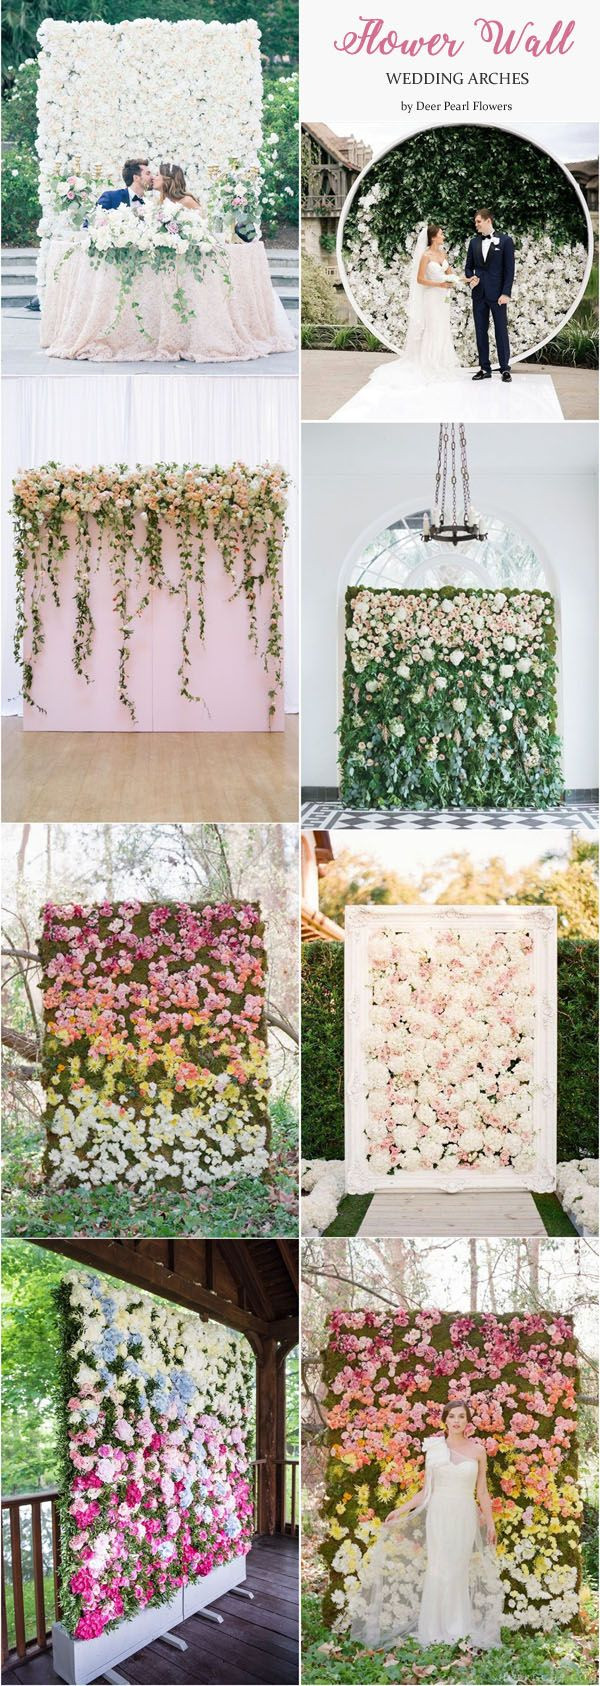 Wall Of Flowers Wedding
 Pin by Danielle Hwang on Wedding in 2019